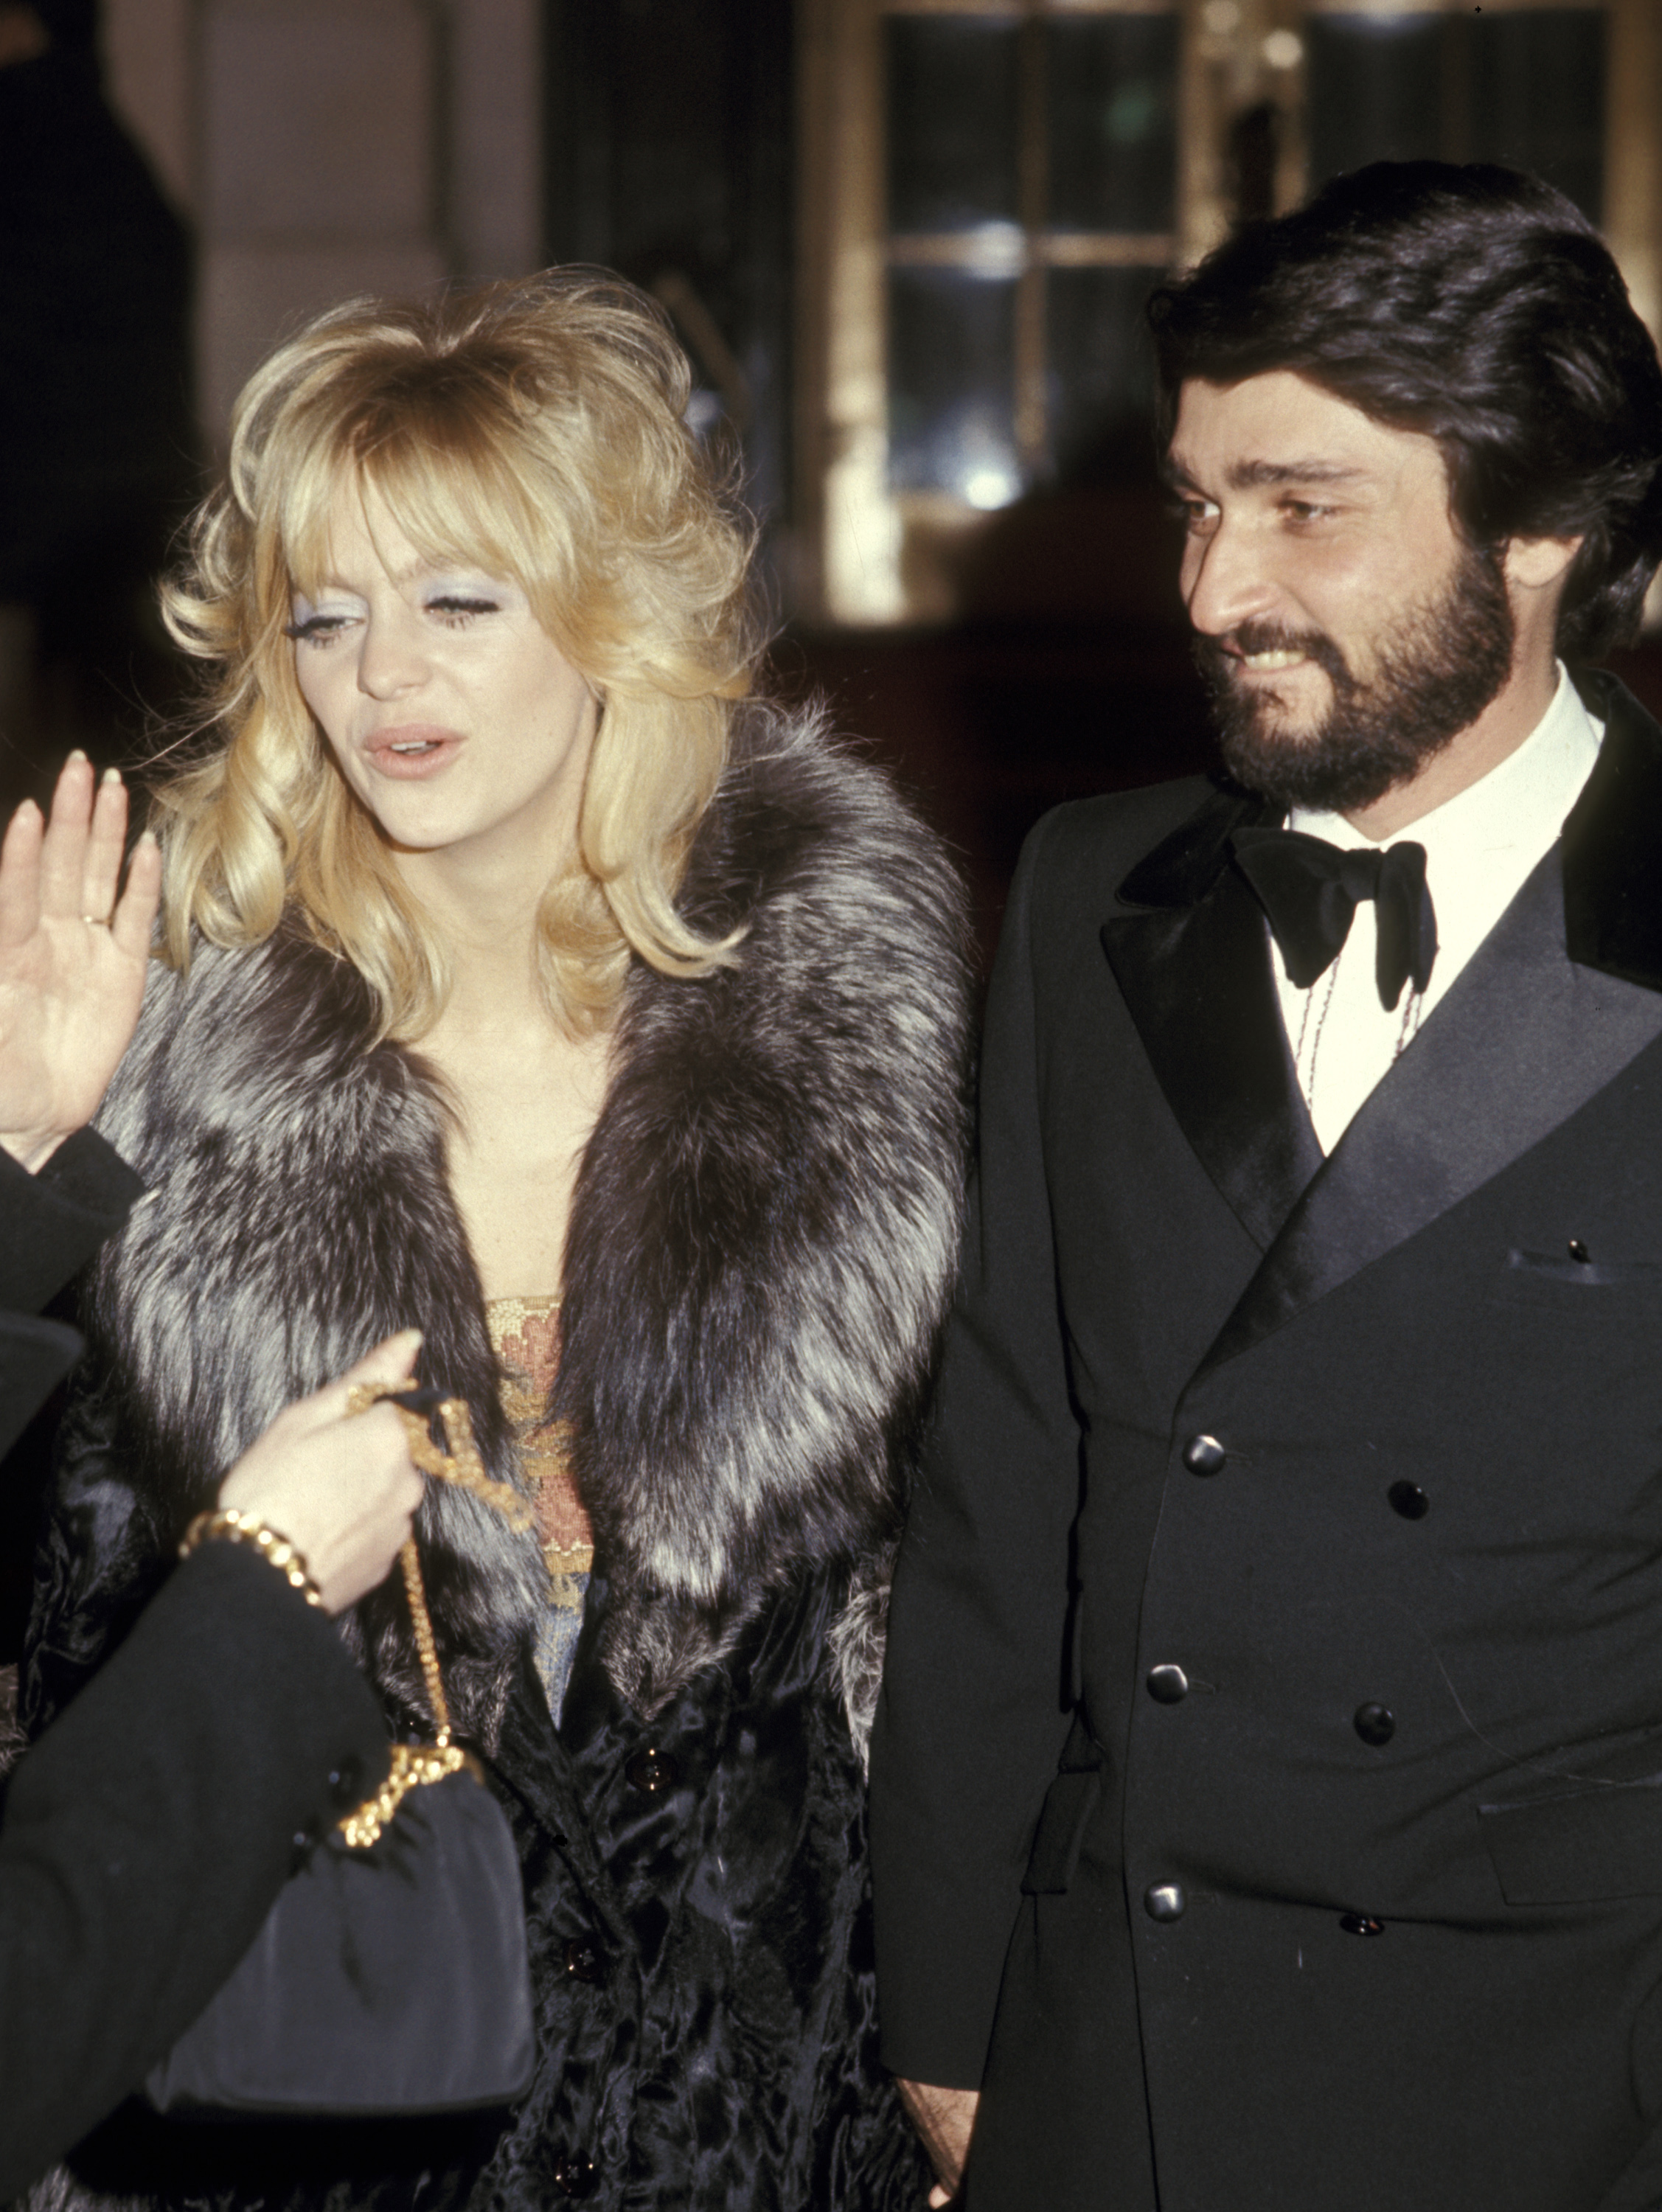 Goldie Hawn and Husband Gus Trikonis at the "There's a Girl in My Soup" New York Premiere | Source: Getty Images